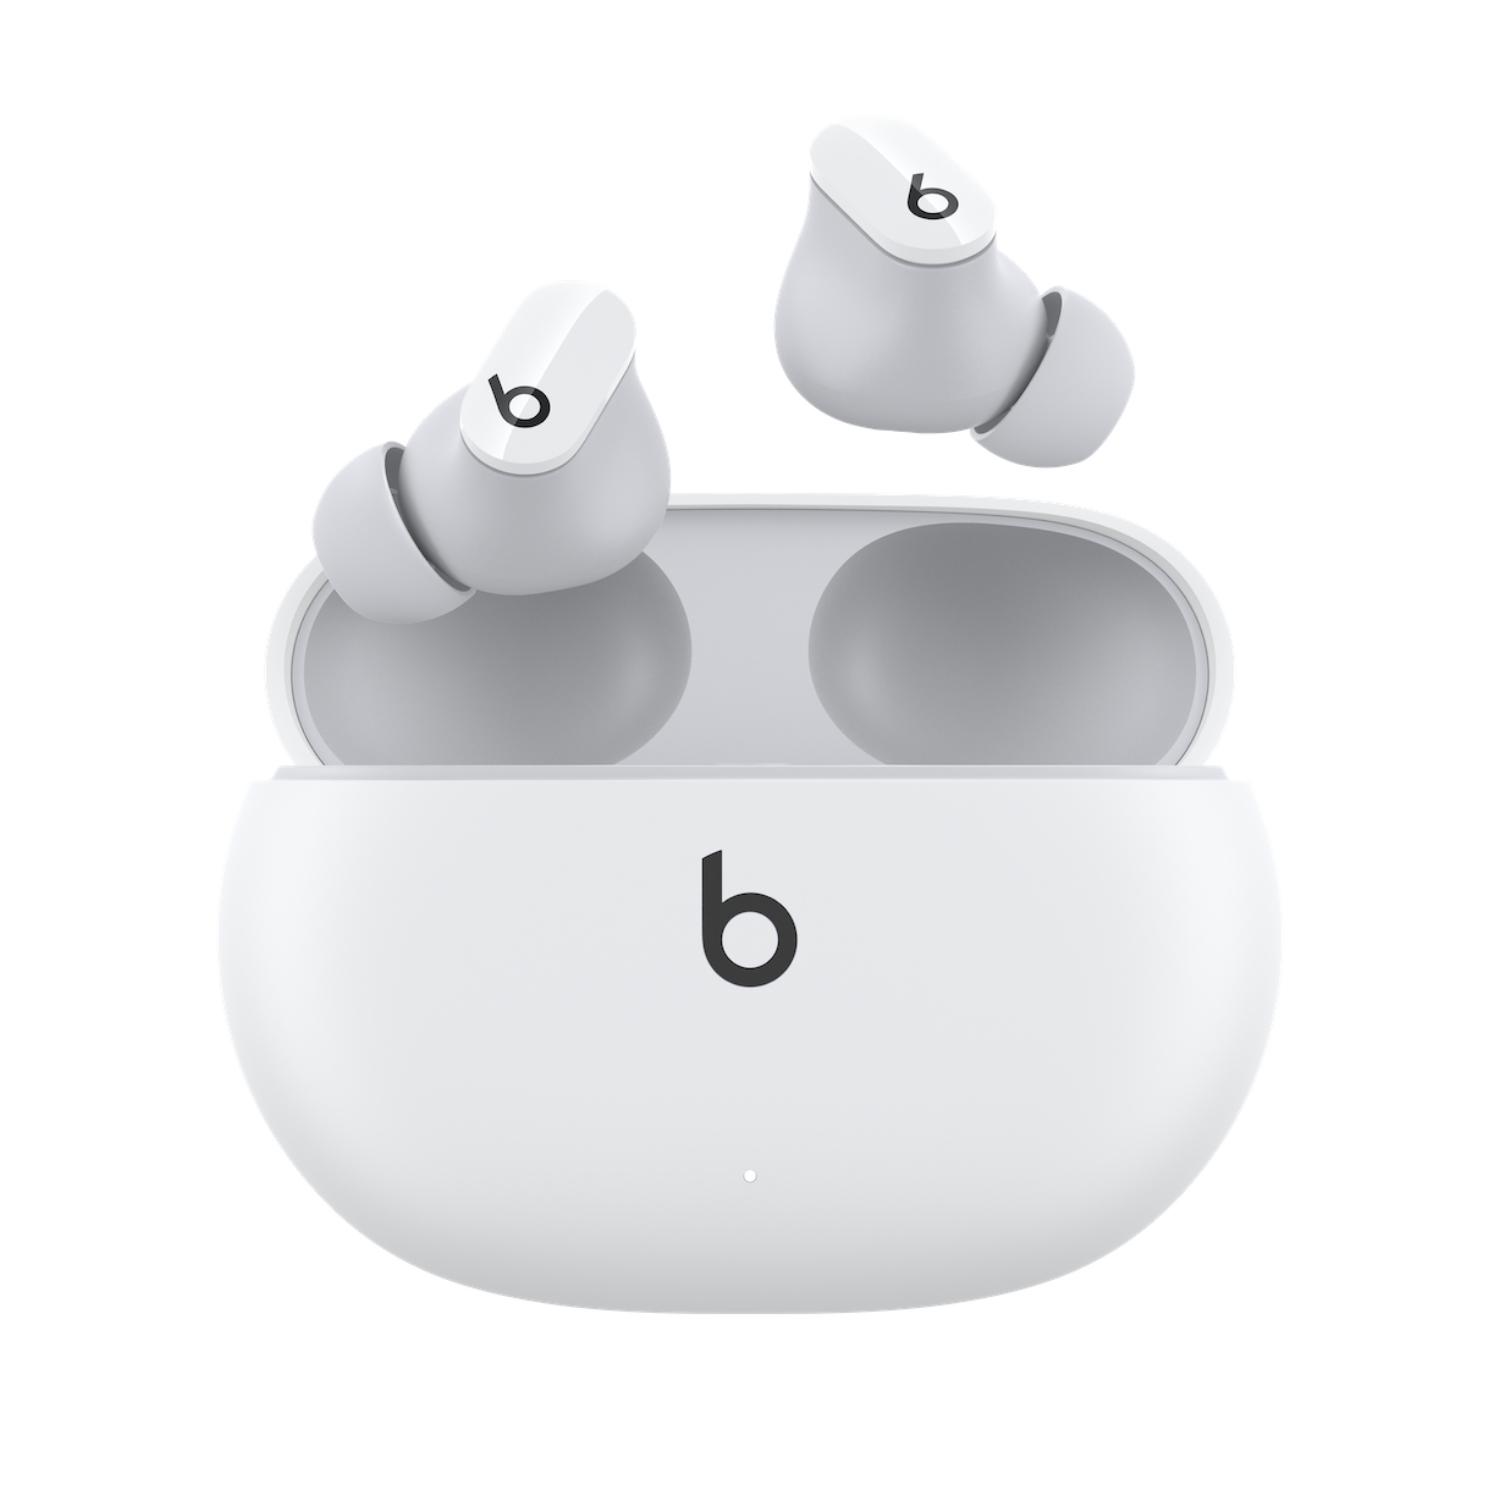 BEATS Studio Buds Wireless Bluetooth Noise-Cancelling Earbuds - White, White